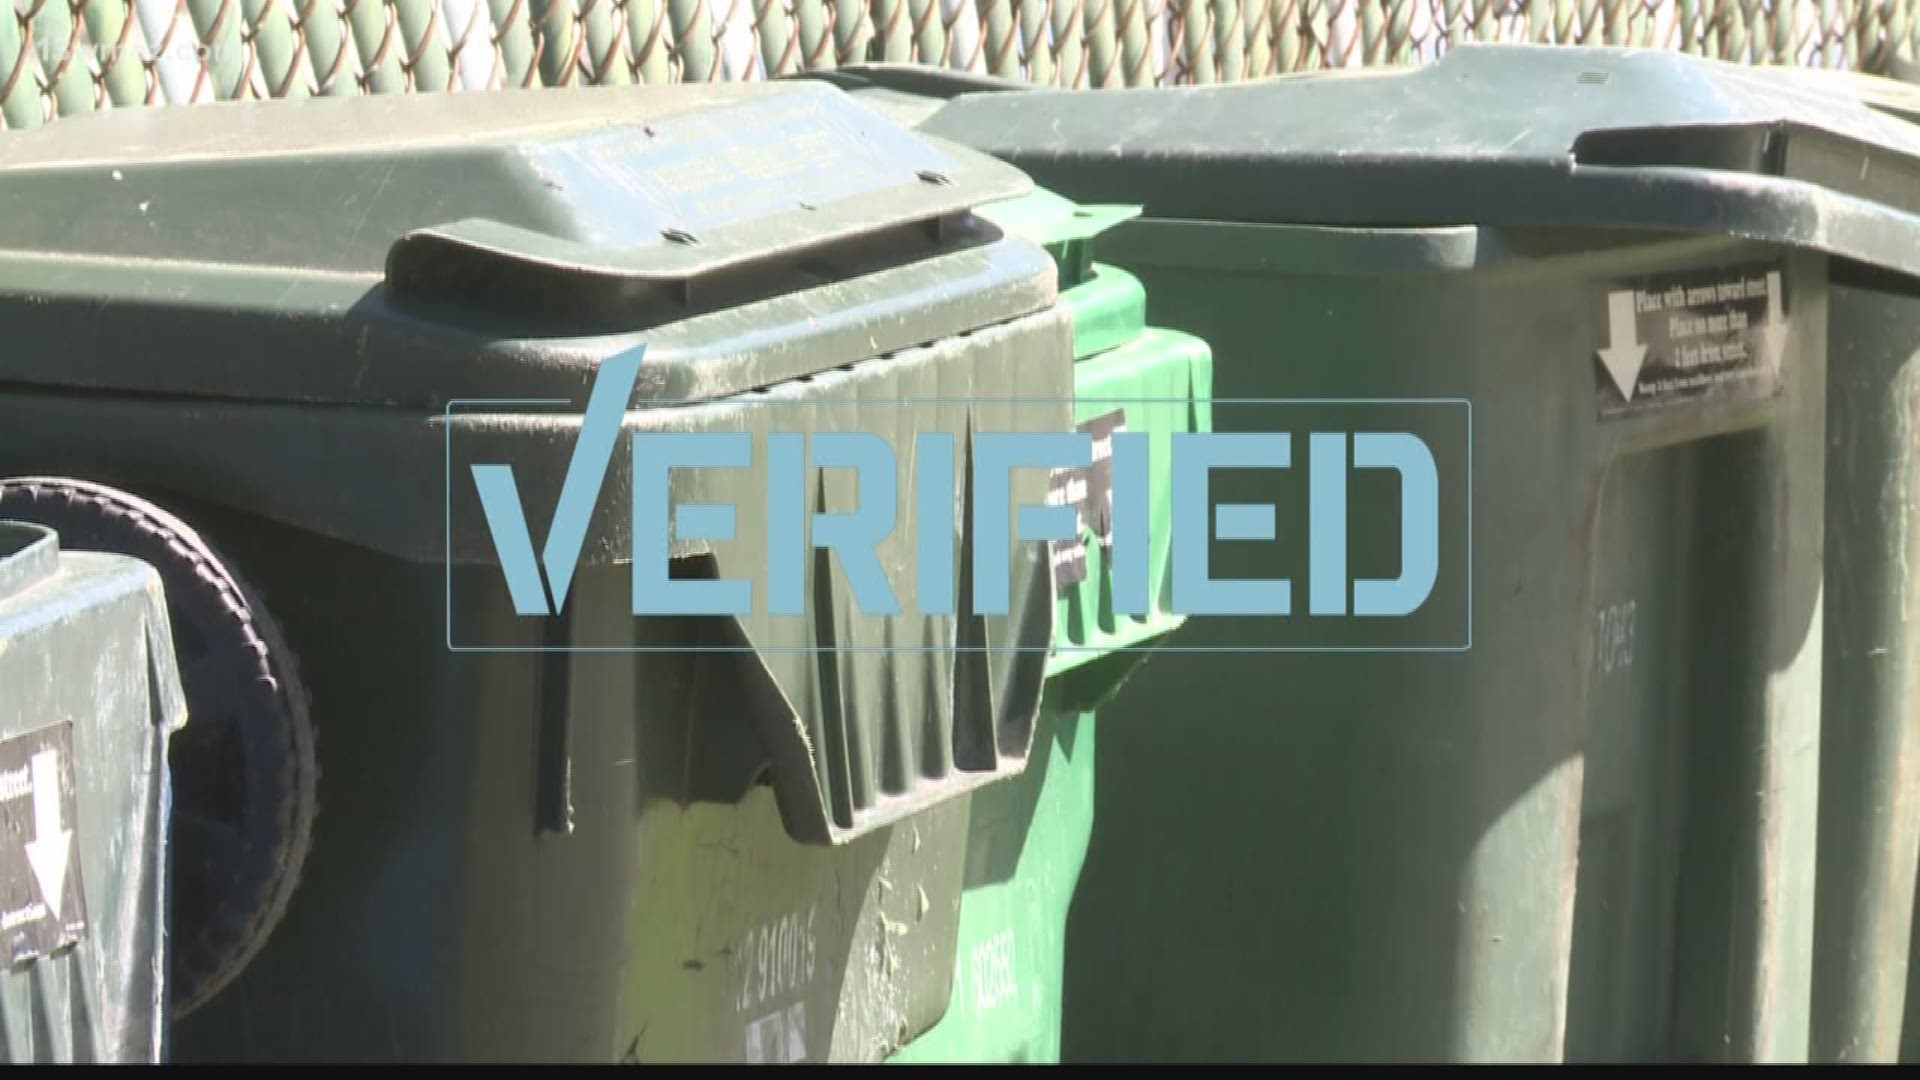 Verify: Can a local ordinance be overturned by a petition?